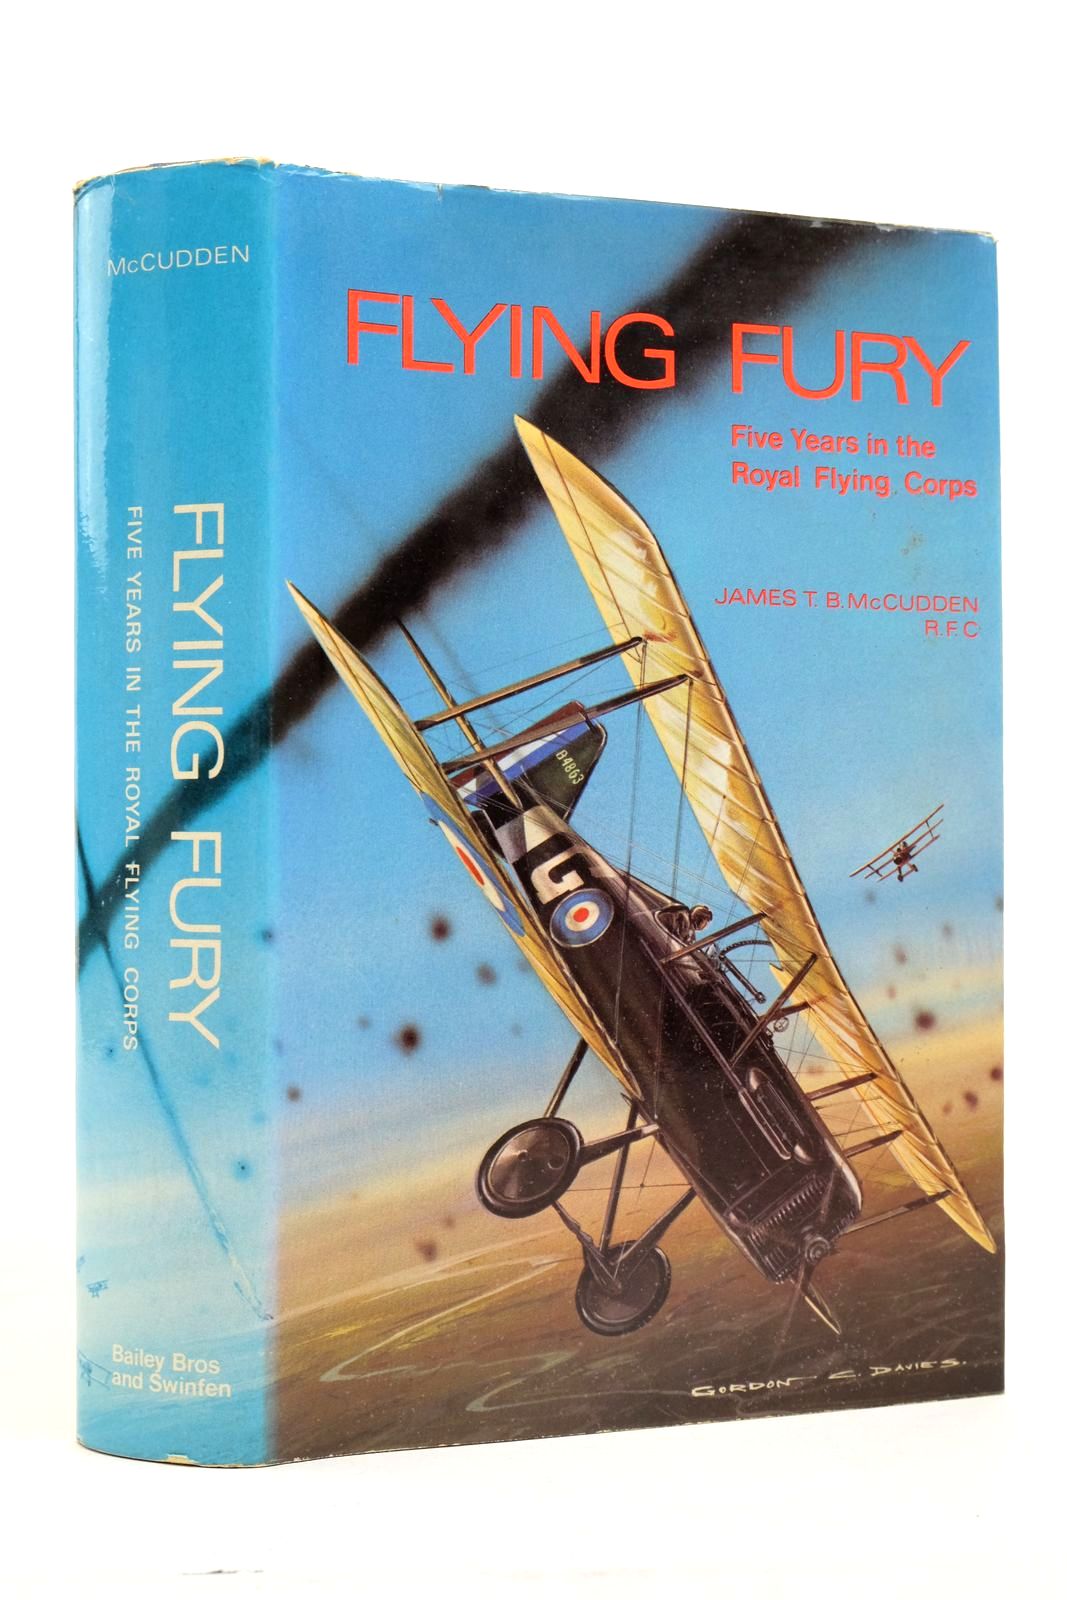 Photo of FLYING FURY FIVE YEARS IN THE ROYAL FLYING CORPS written by McCudden, James T.B.
Ulanoff, Stanley M. published by Bailey Brothers and Swinfen Ltd. (STOCK CODE: 2139880)  for sale by Stella & Rose's Books